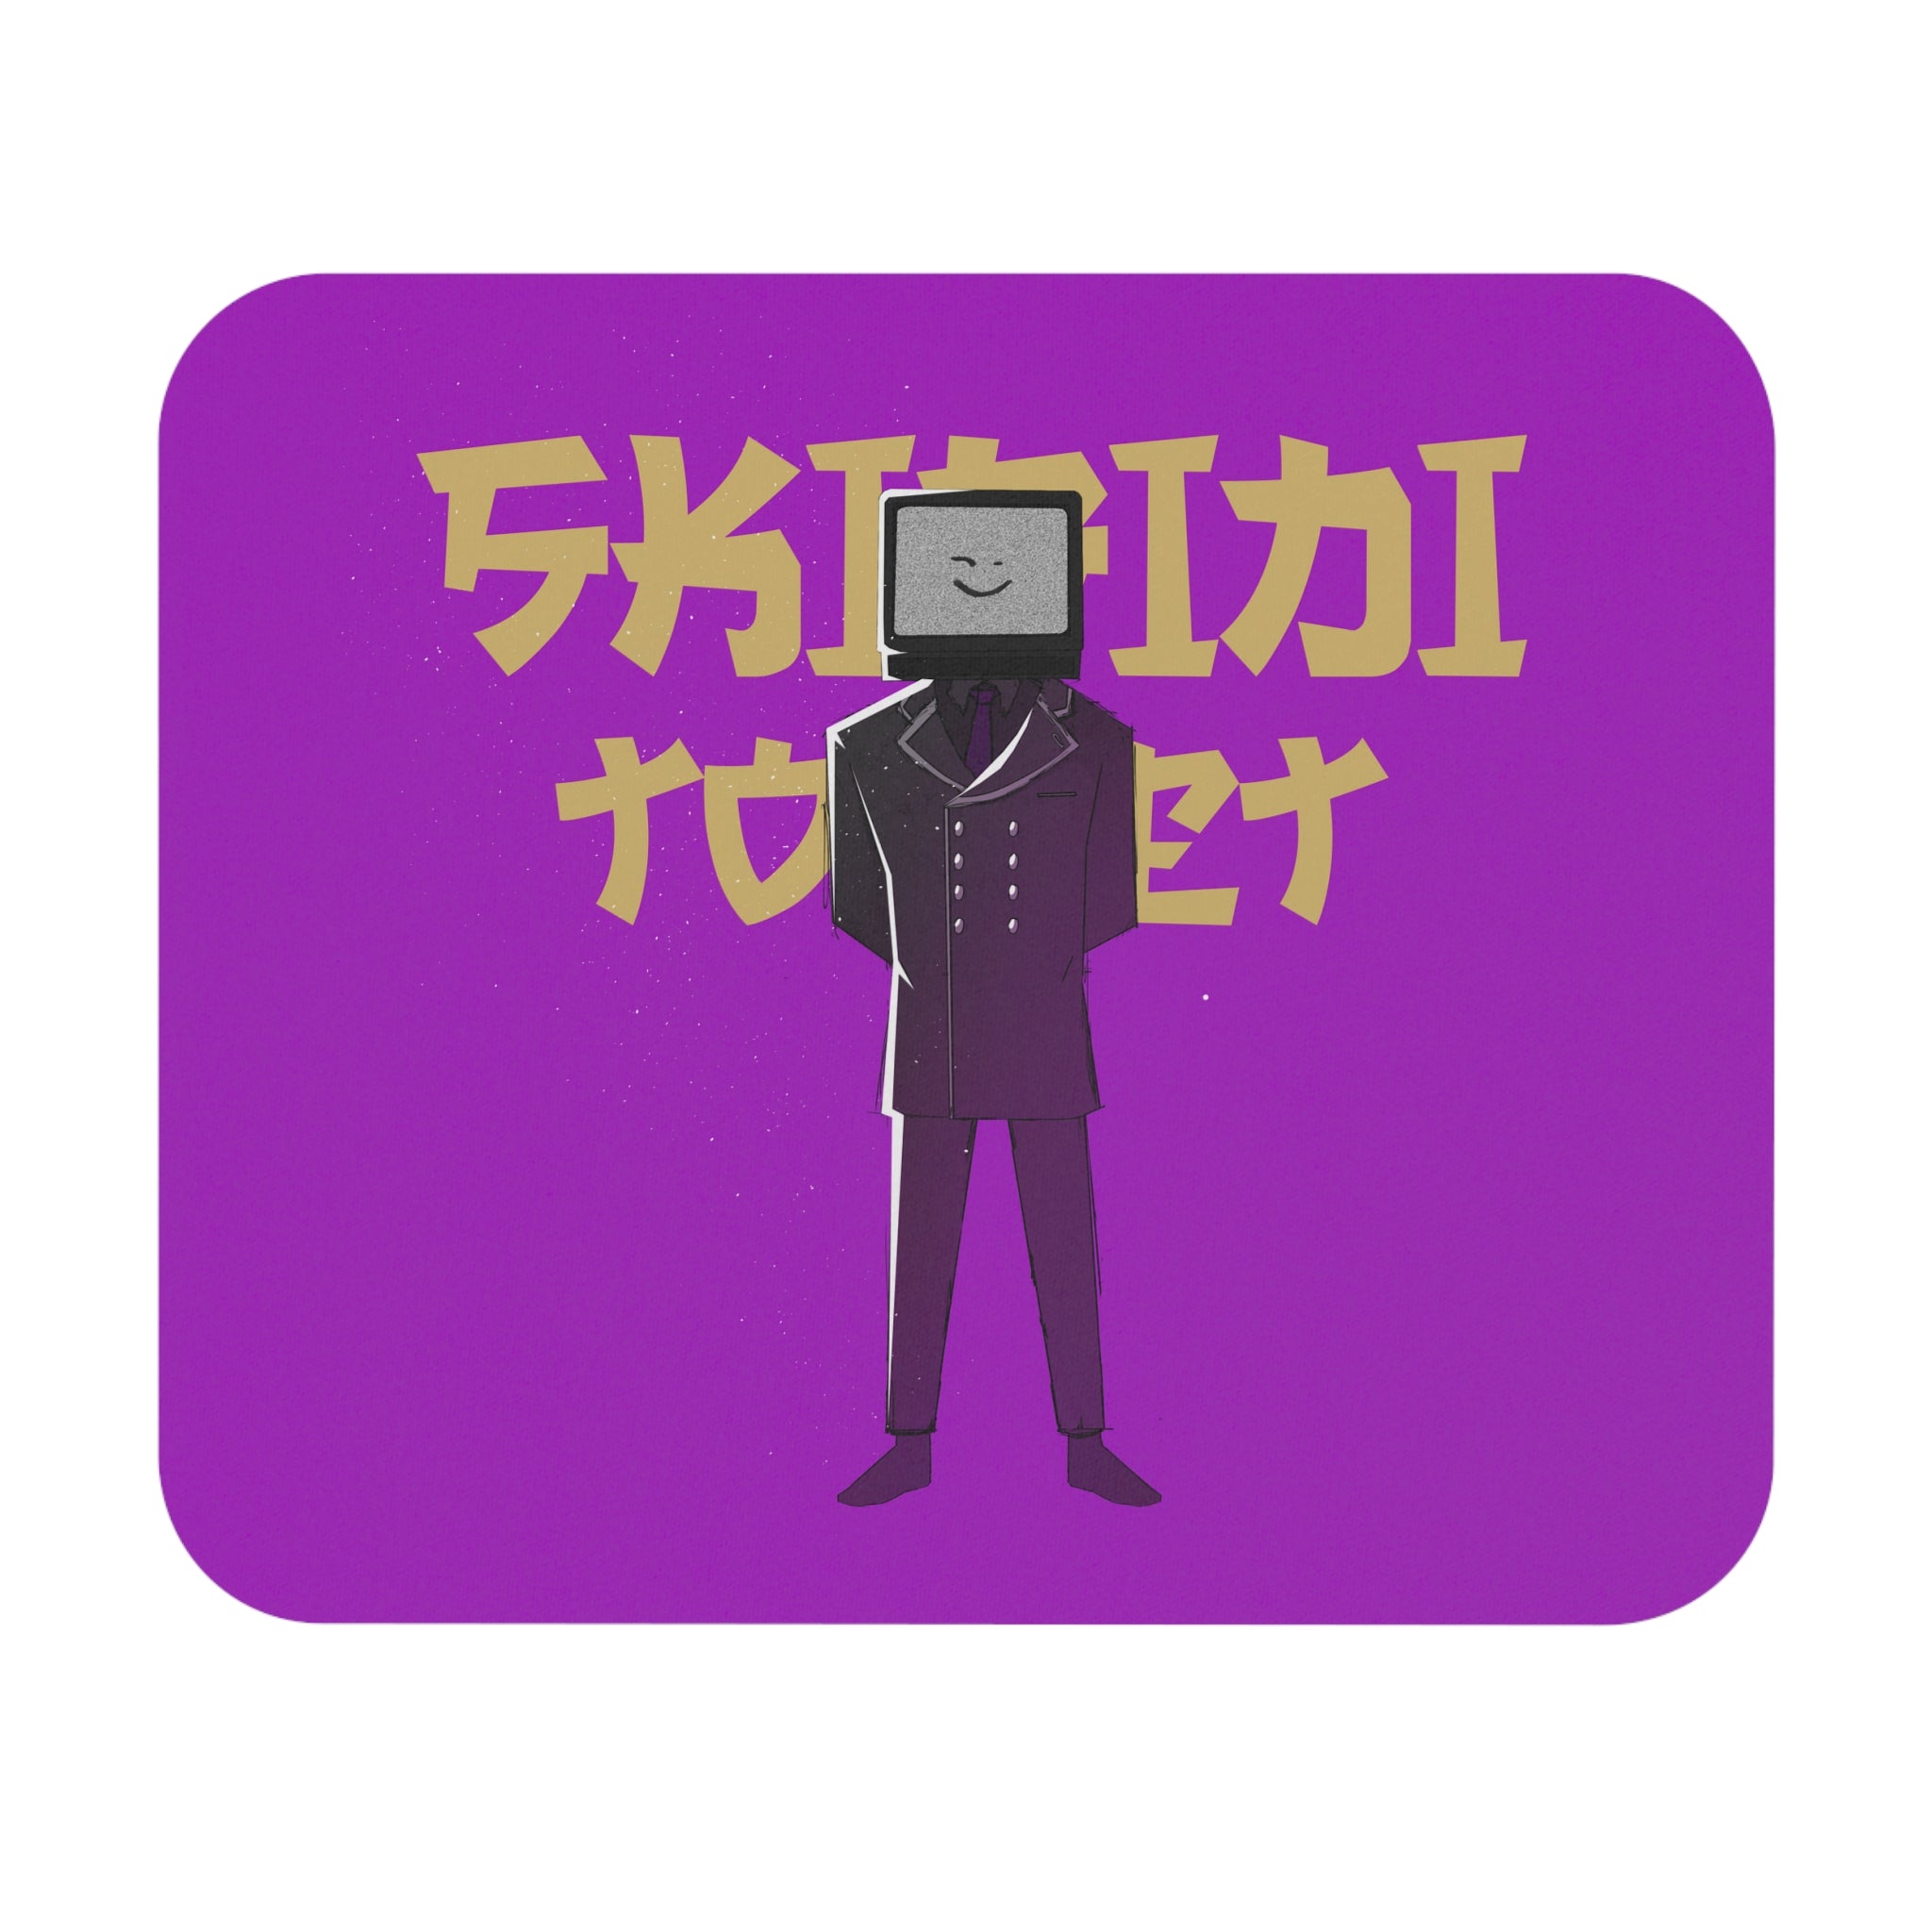 purple mousepad featuring TV Man and gold text